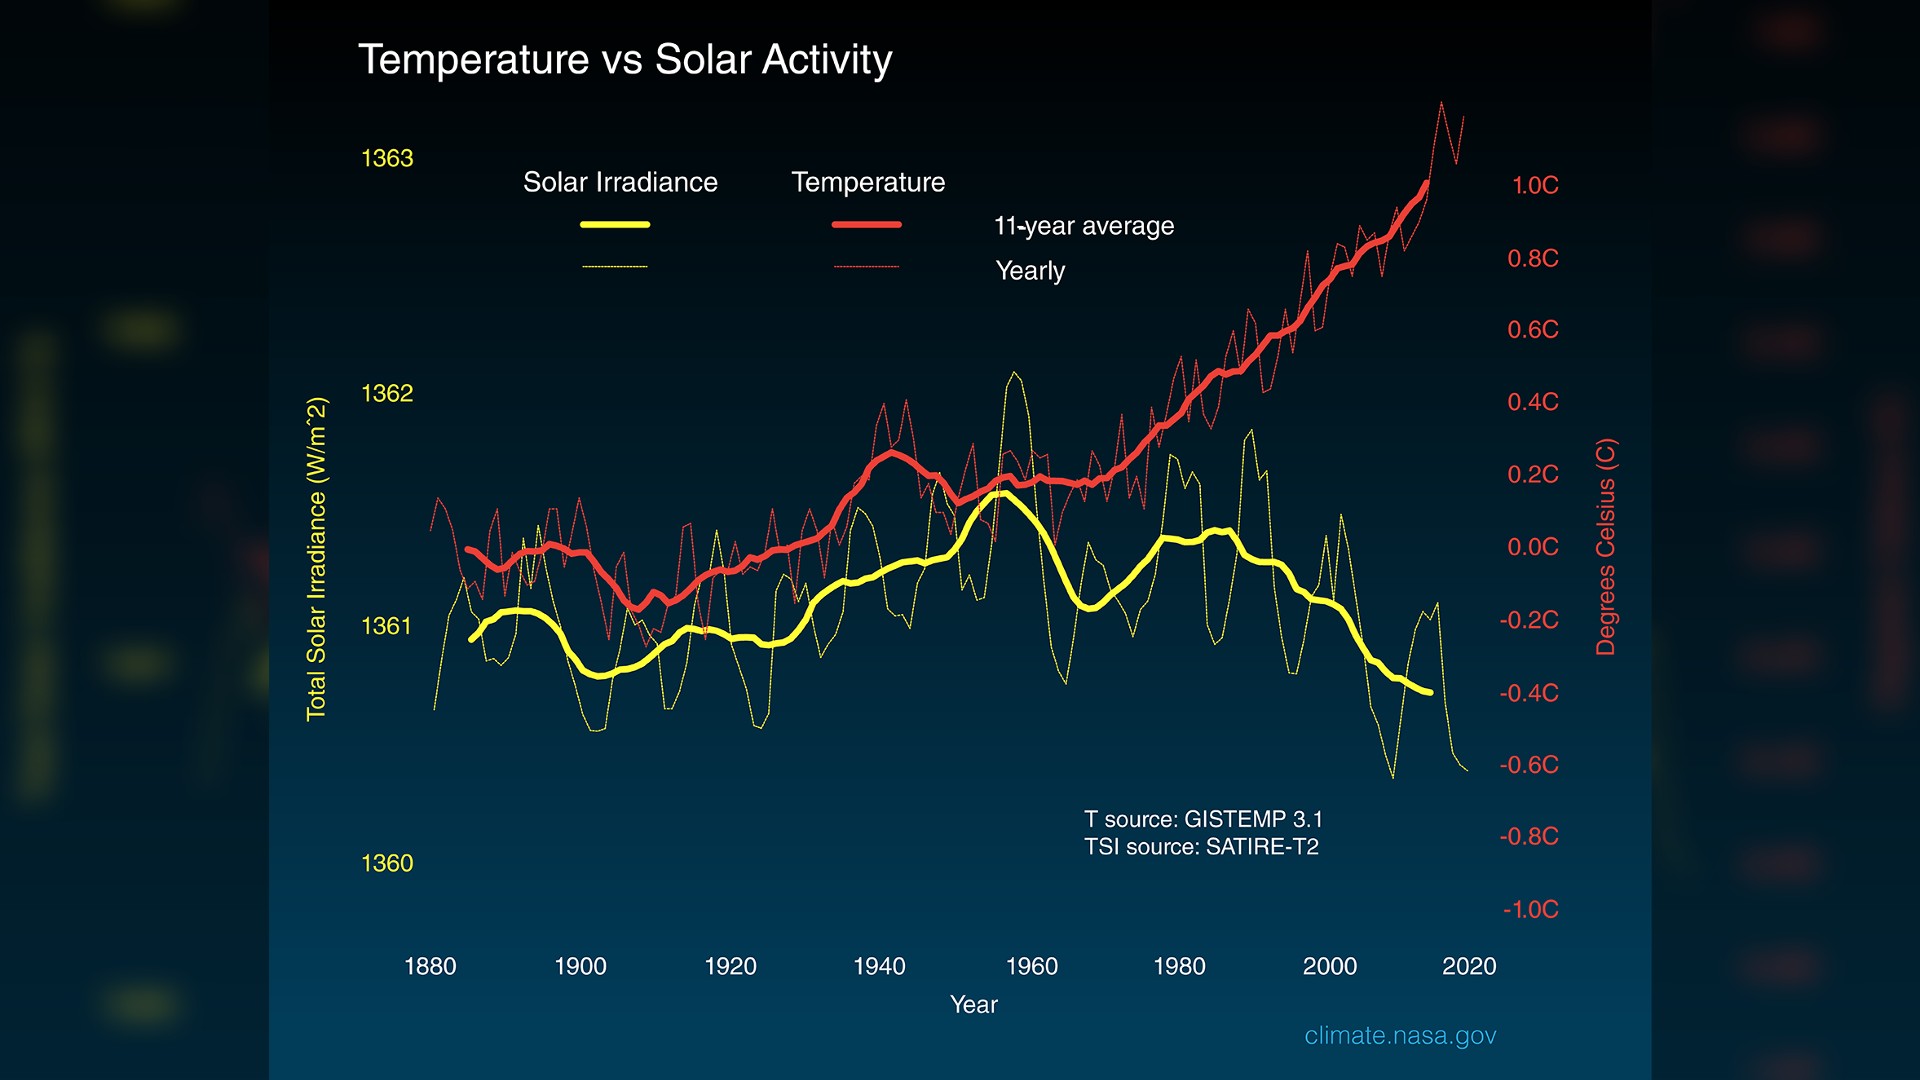 Global surface temperature changes (red line) compared to the sun's energy received by Earth (yellow line) in watts (units of energy) per square meter since 1880.